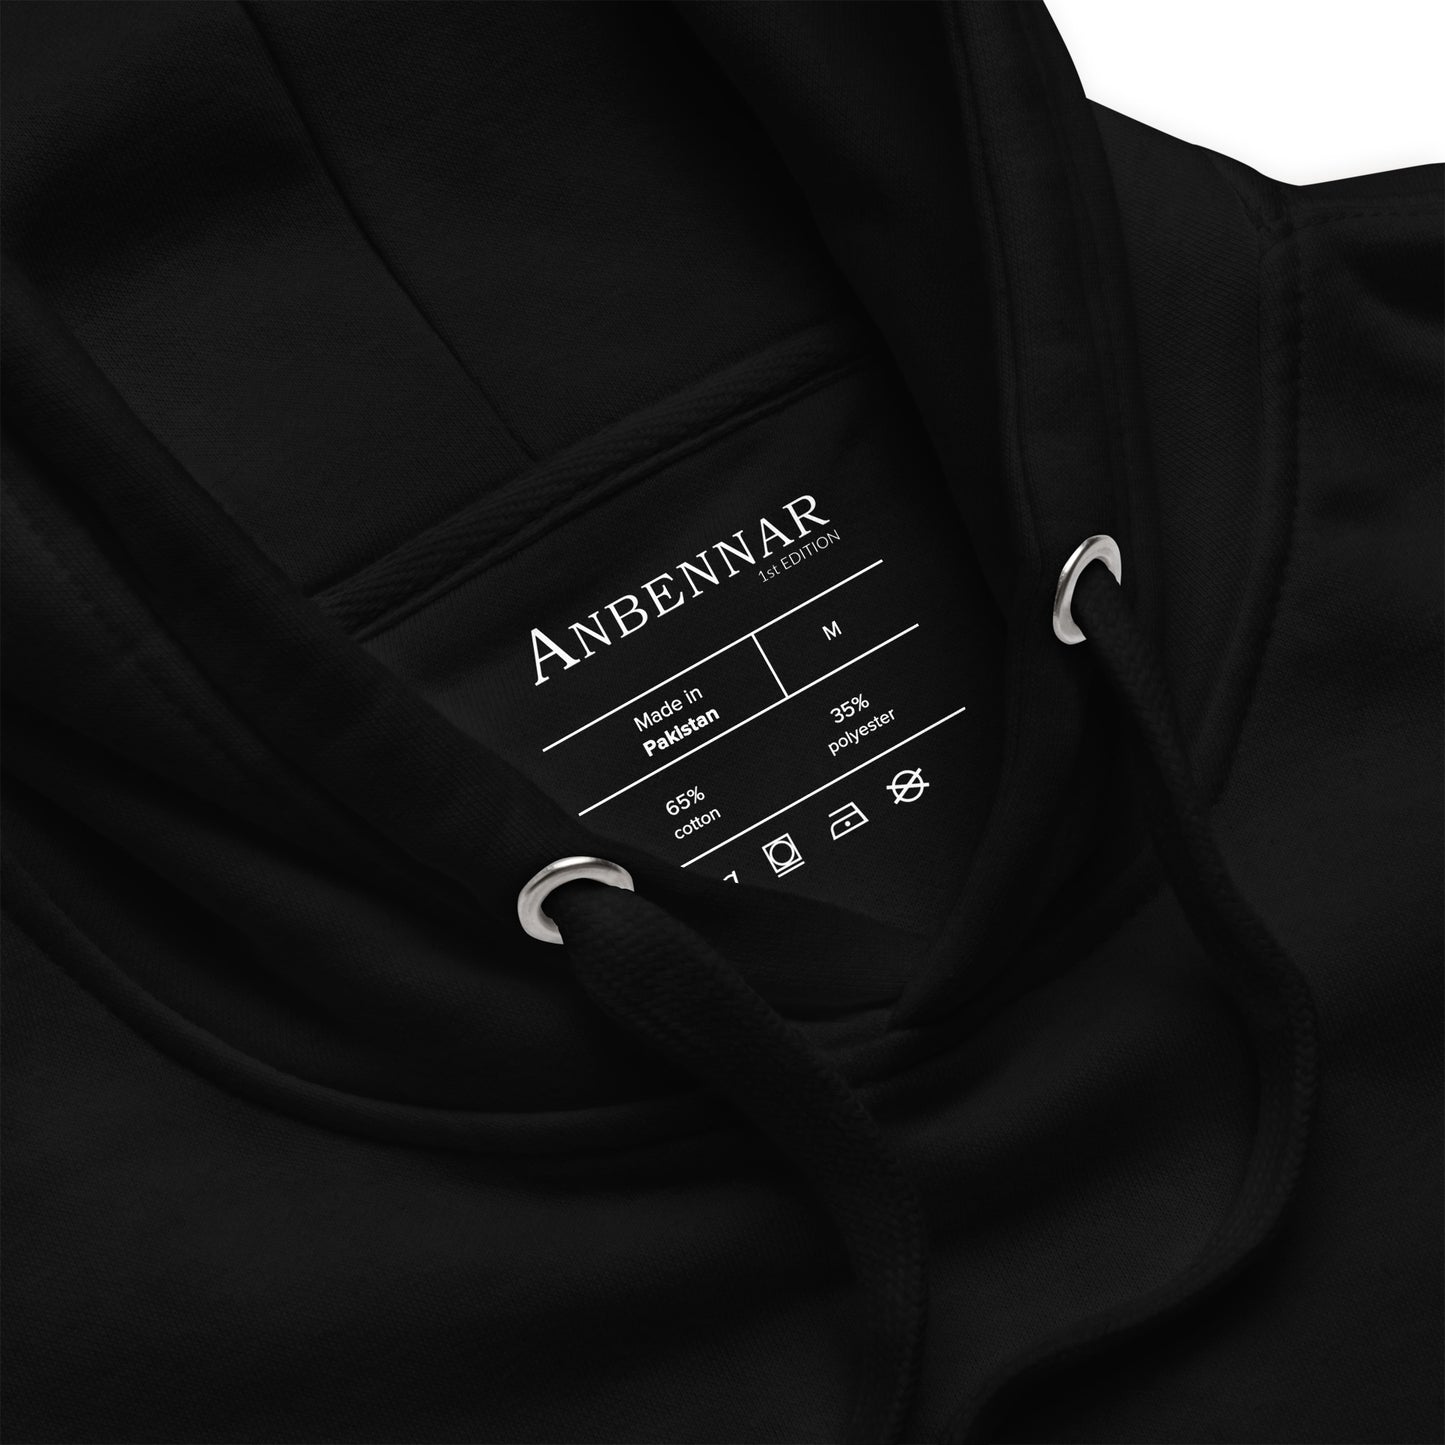 Ravelian Not Cube, Embroidered - 1st Edition Limited - Unisex Hoodie